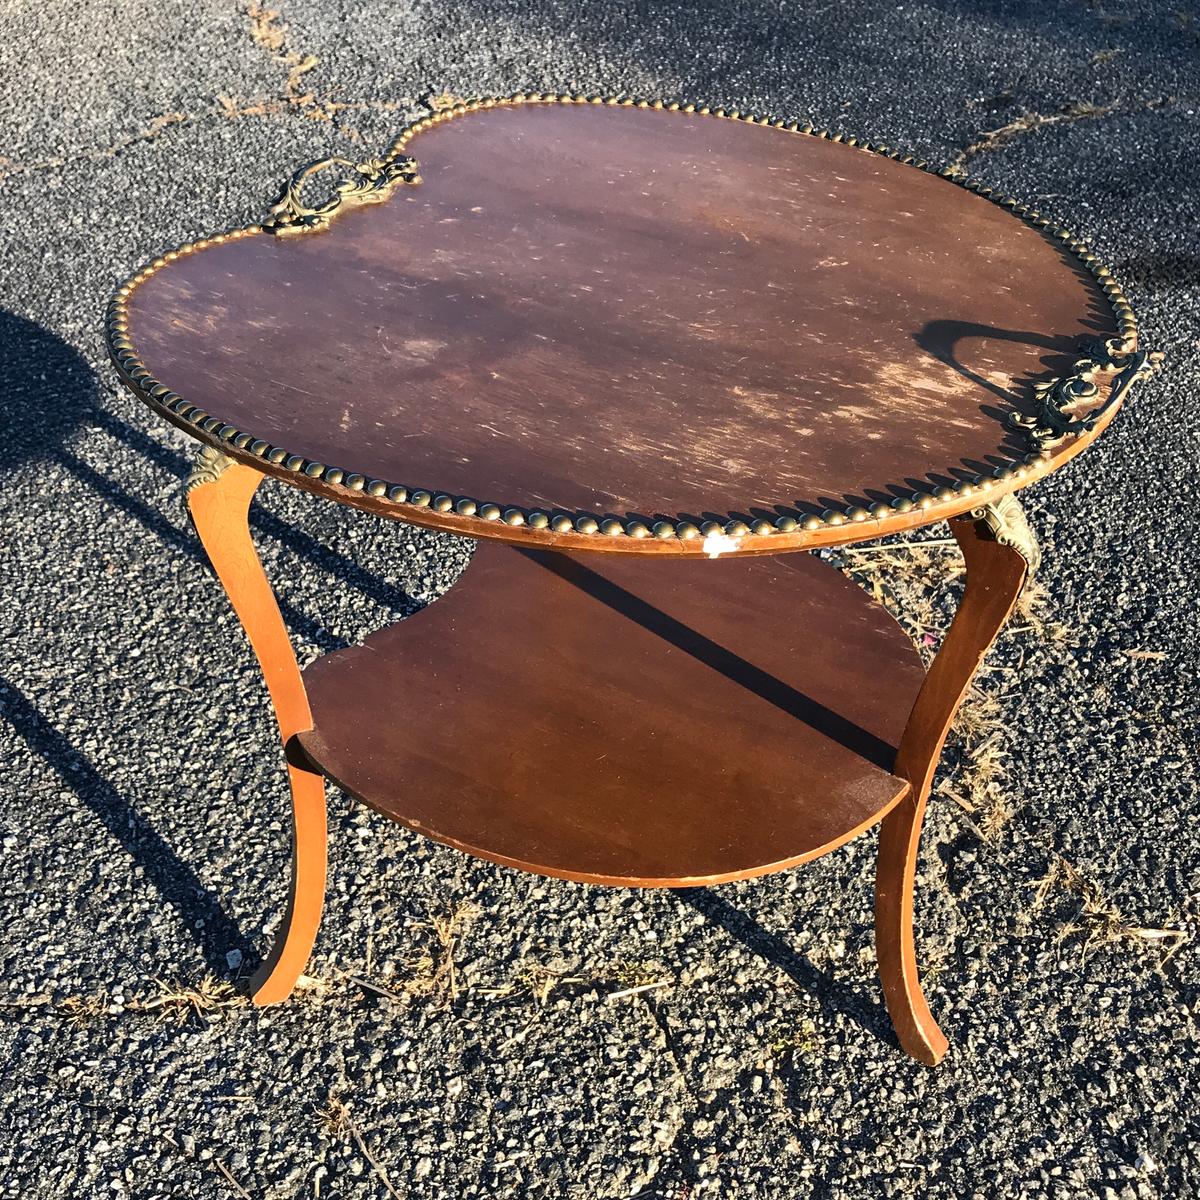 Unique Antique Wooden 2 Tier Table with Brass Tacking & Handles